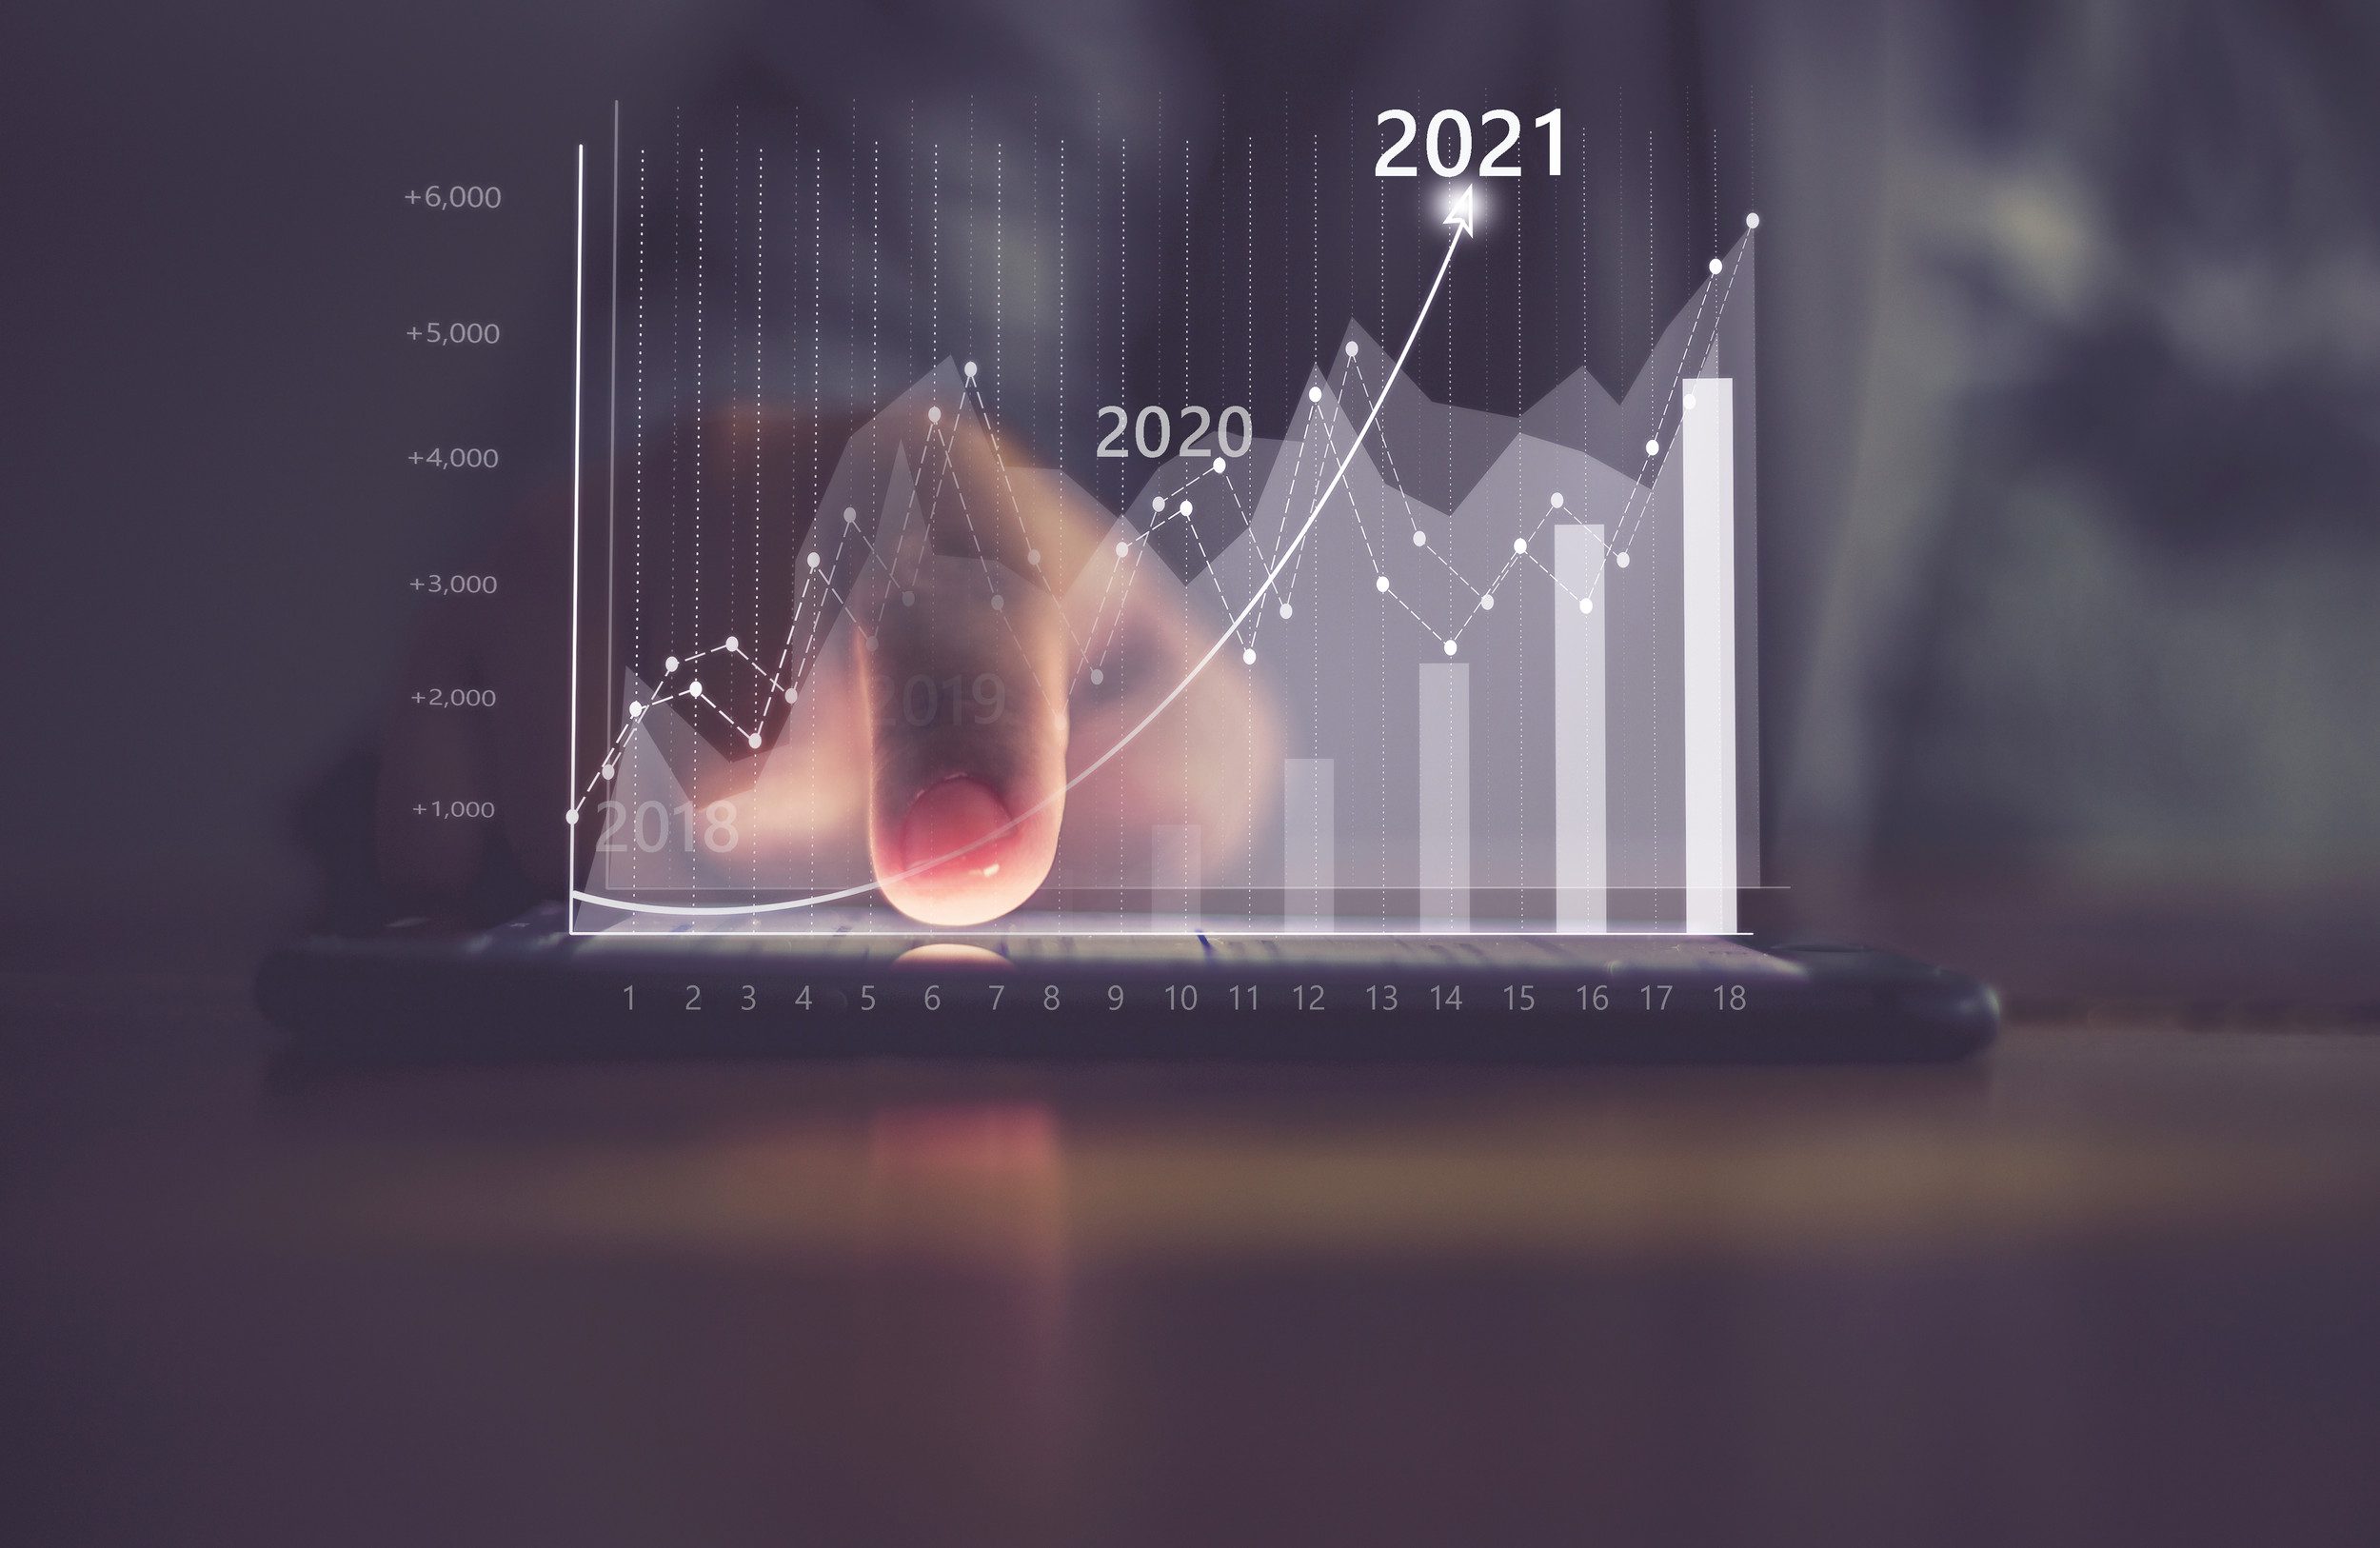 Augmented reality (AR) financial charts showing growing revenue In 2021